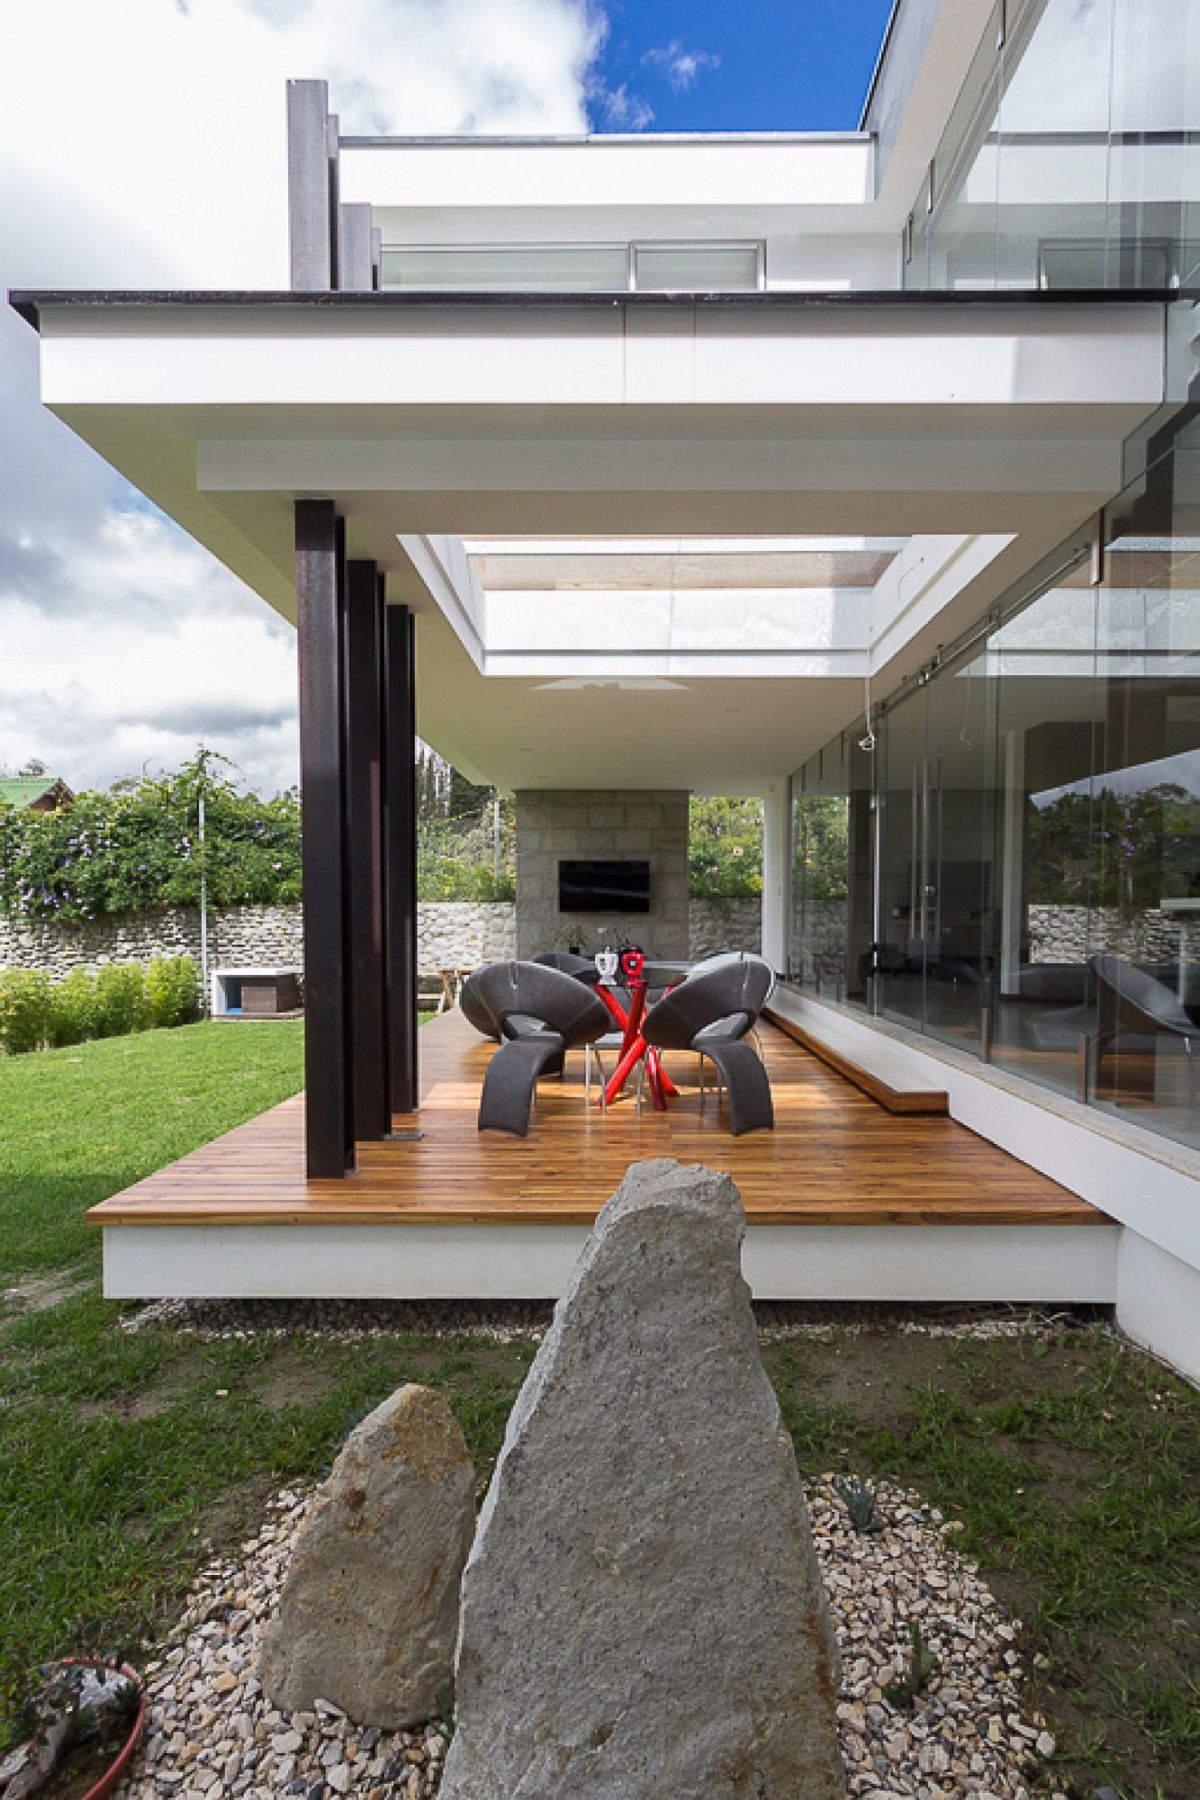 Unique design of the home and pergola takes the living experience outdoors